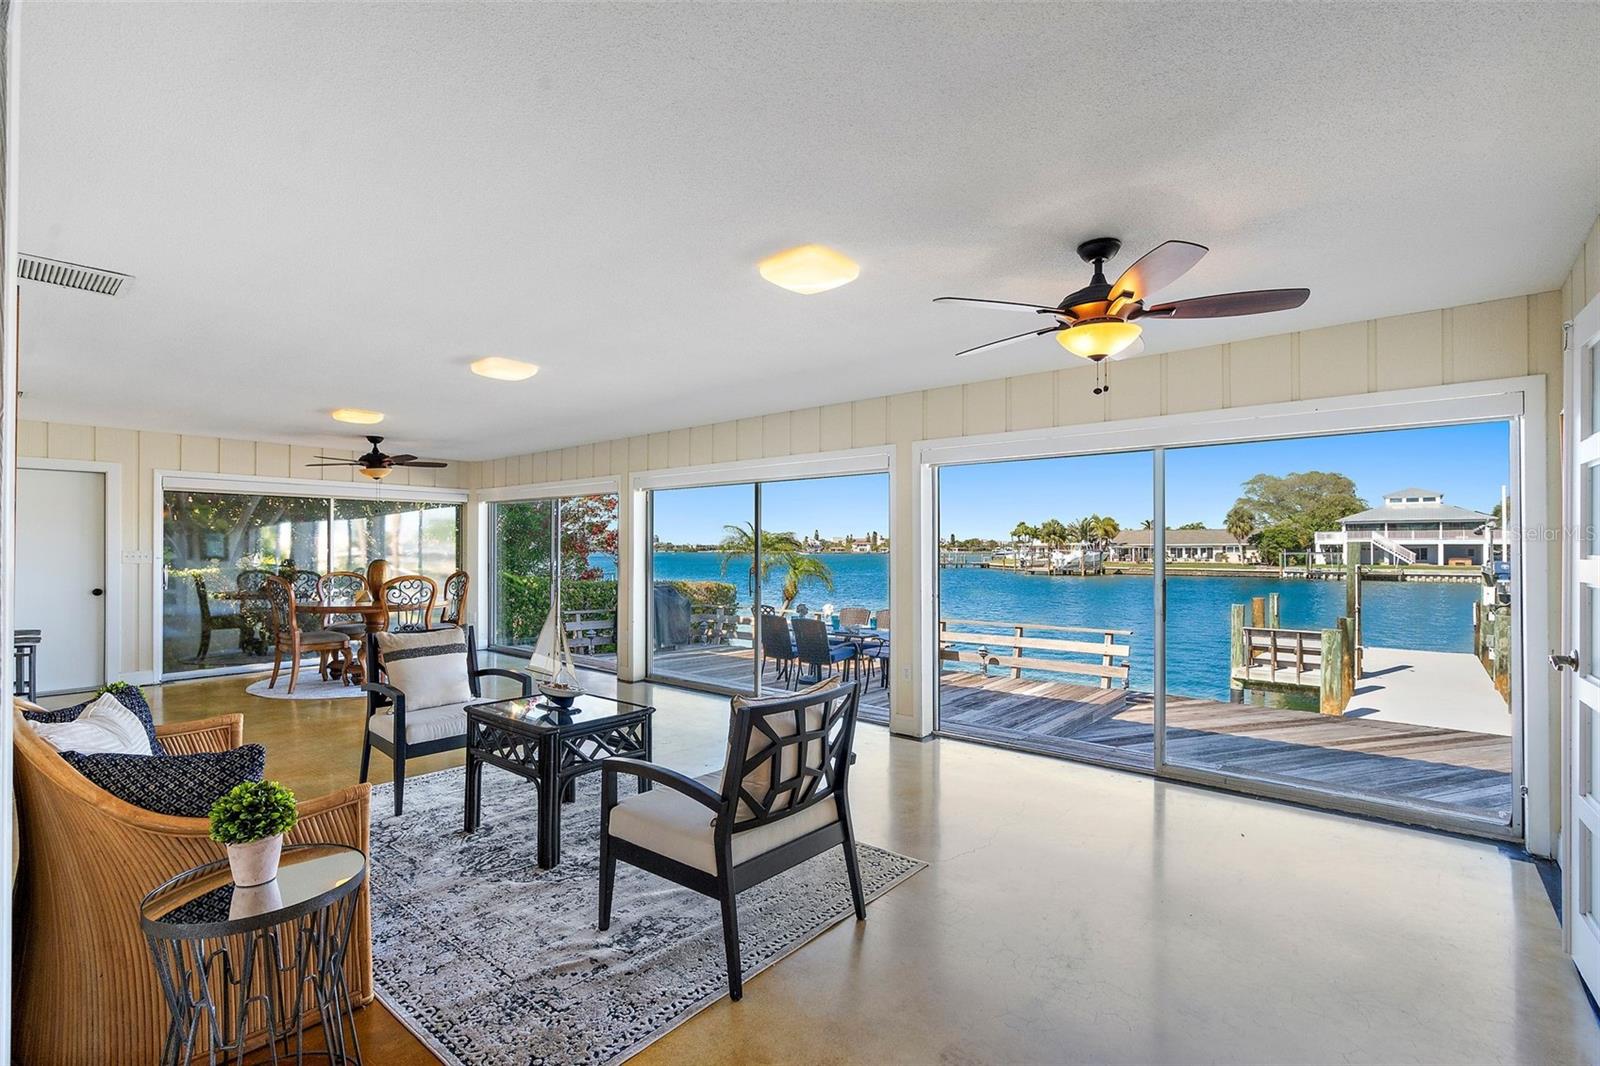 When you approach the entry to the Florida/Sun Room, the view will simply 'blow you away!' The open water view to the north-east is stunning!